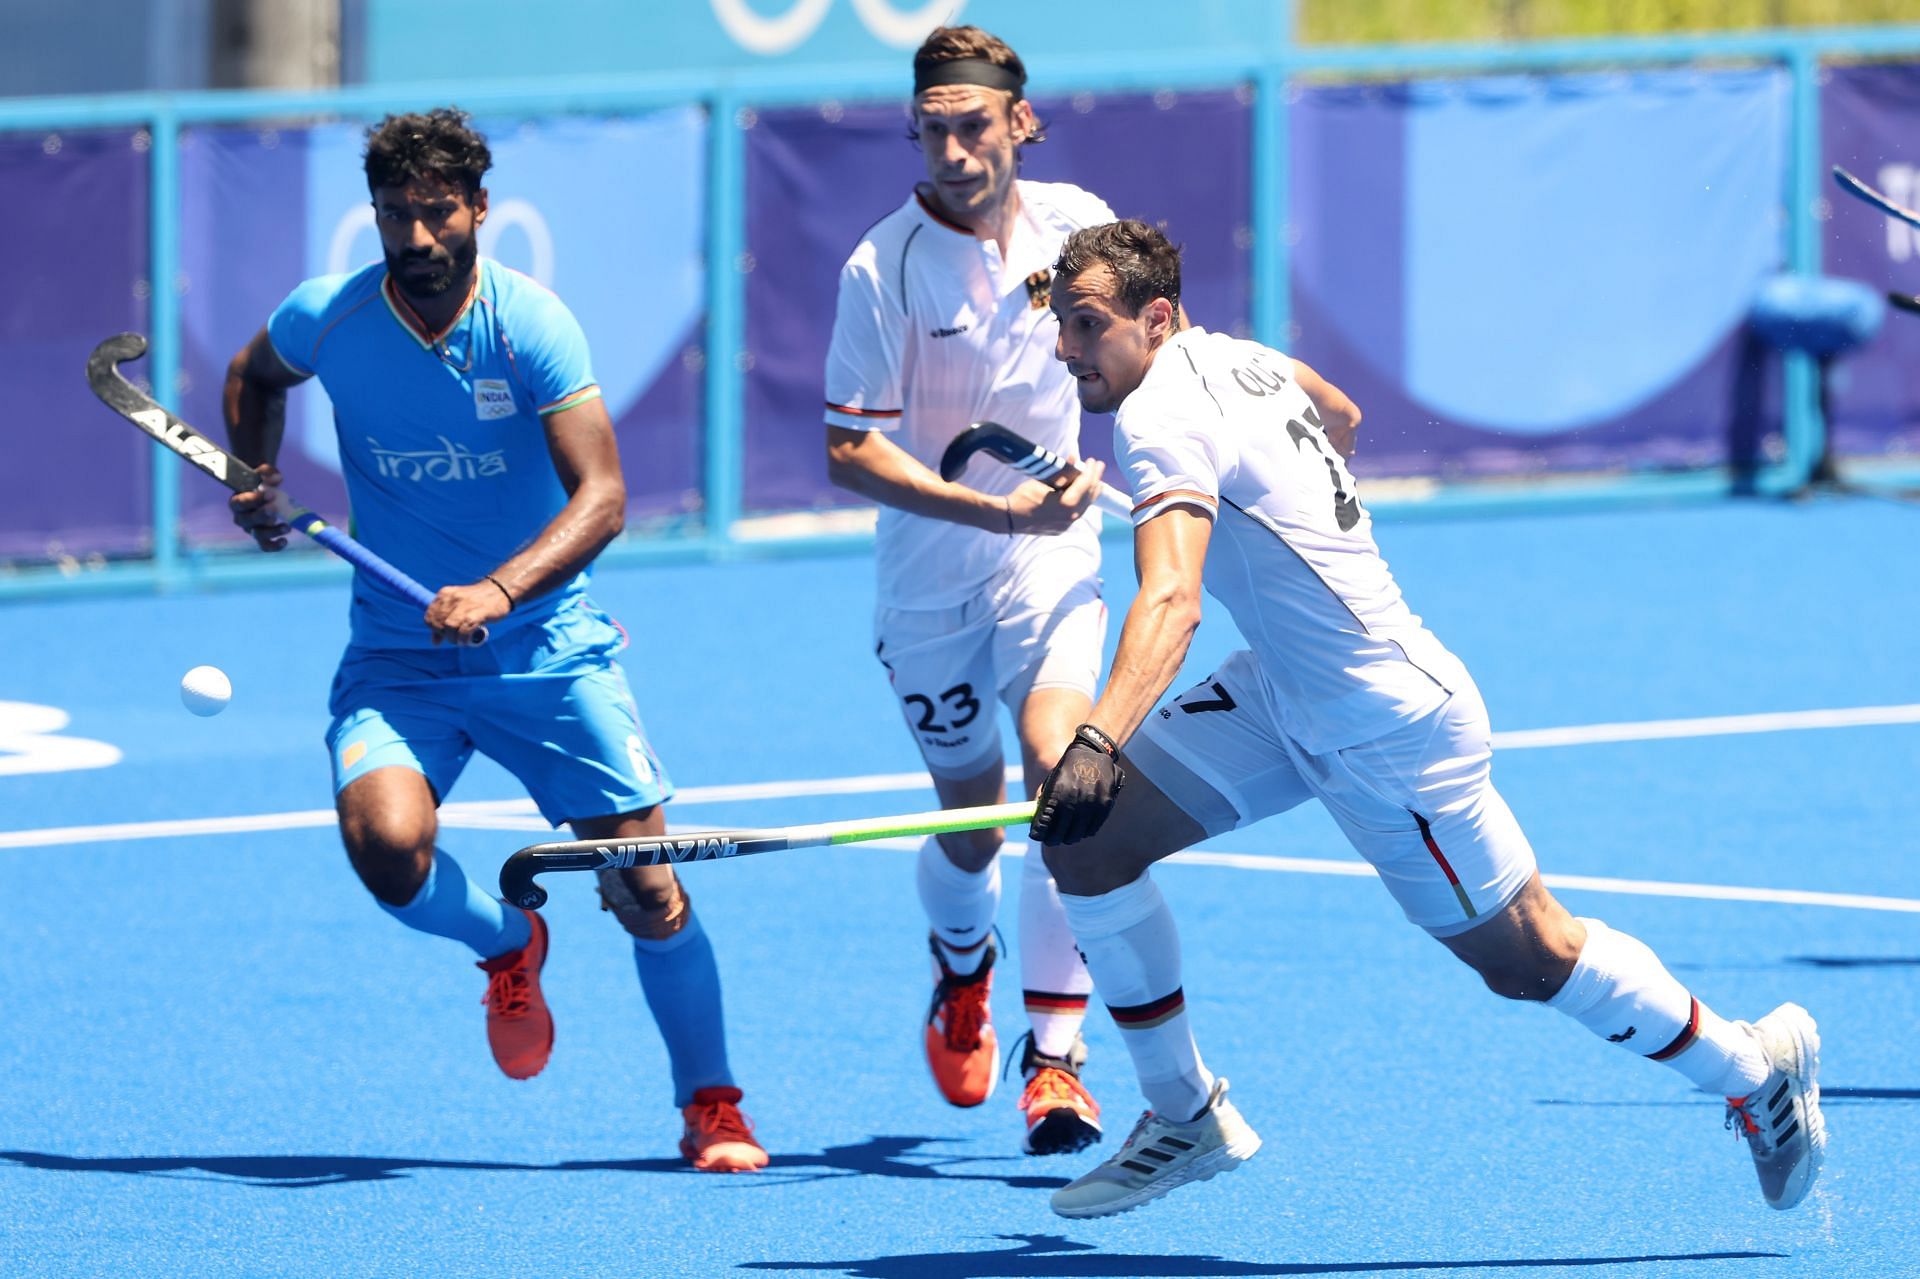 The Indians continue their Hockey Pro League campaign in London